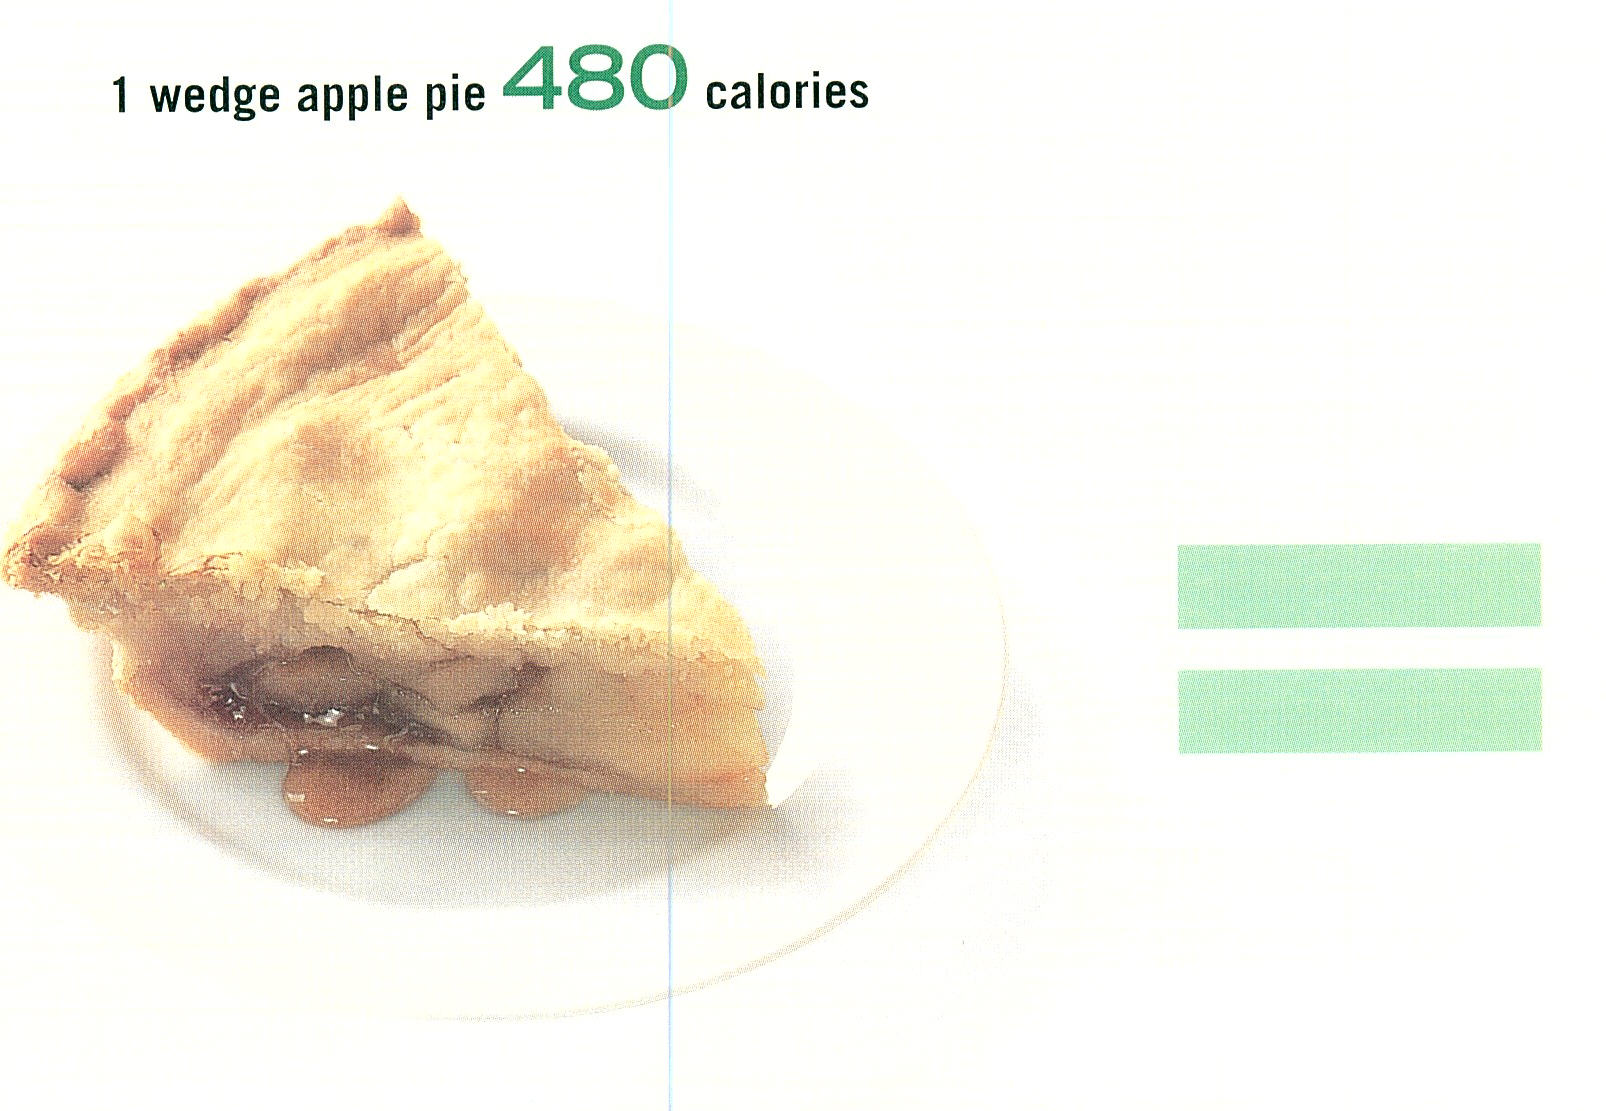 Apple Pie | See the Calorie Difference